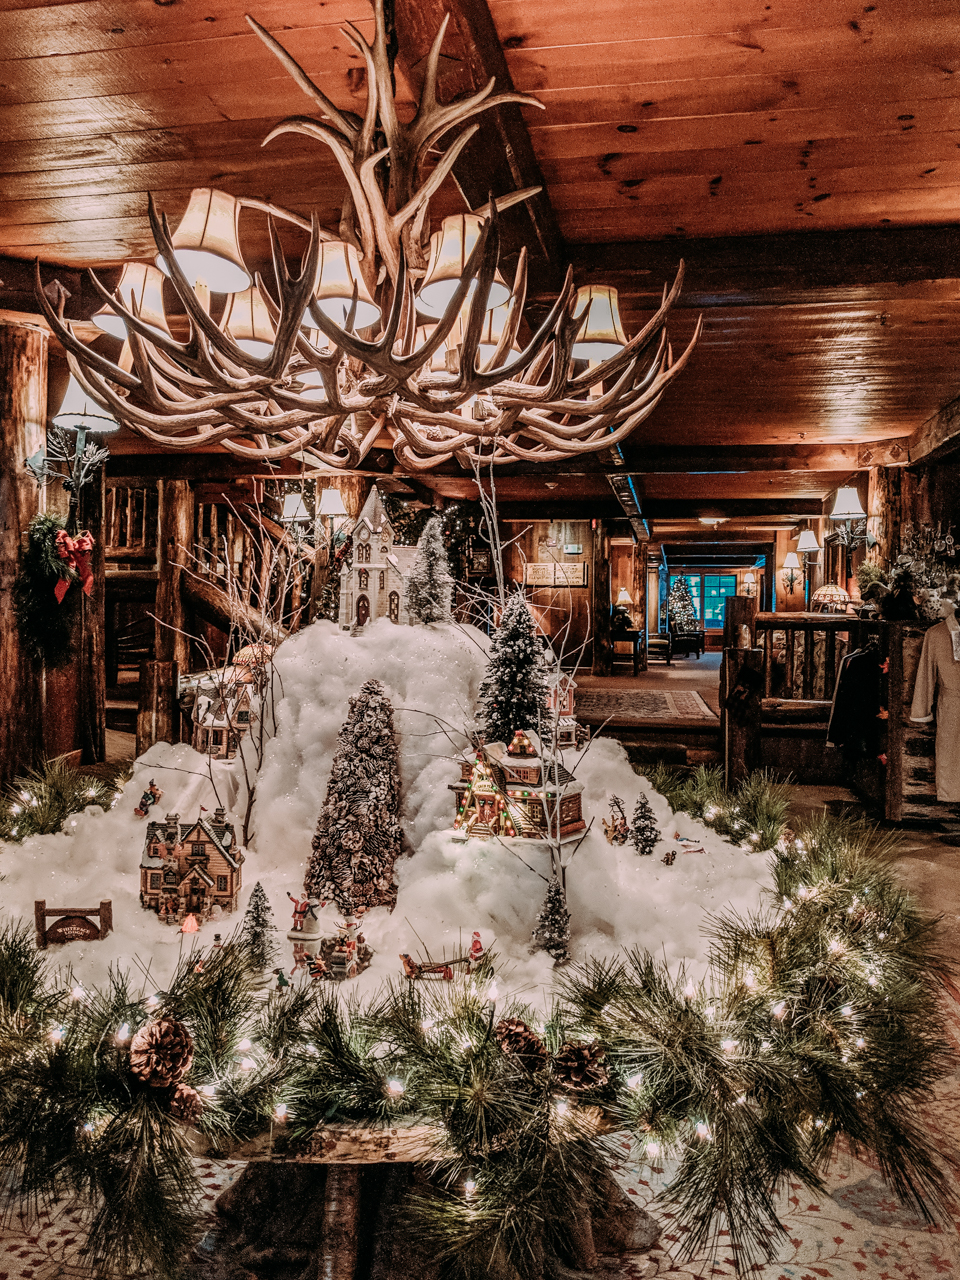 https://shannonshipman.com/whiteface-lodge-lake-placid-review-christmas/whiteface-lodge-75/